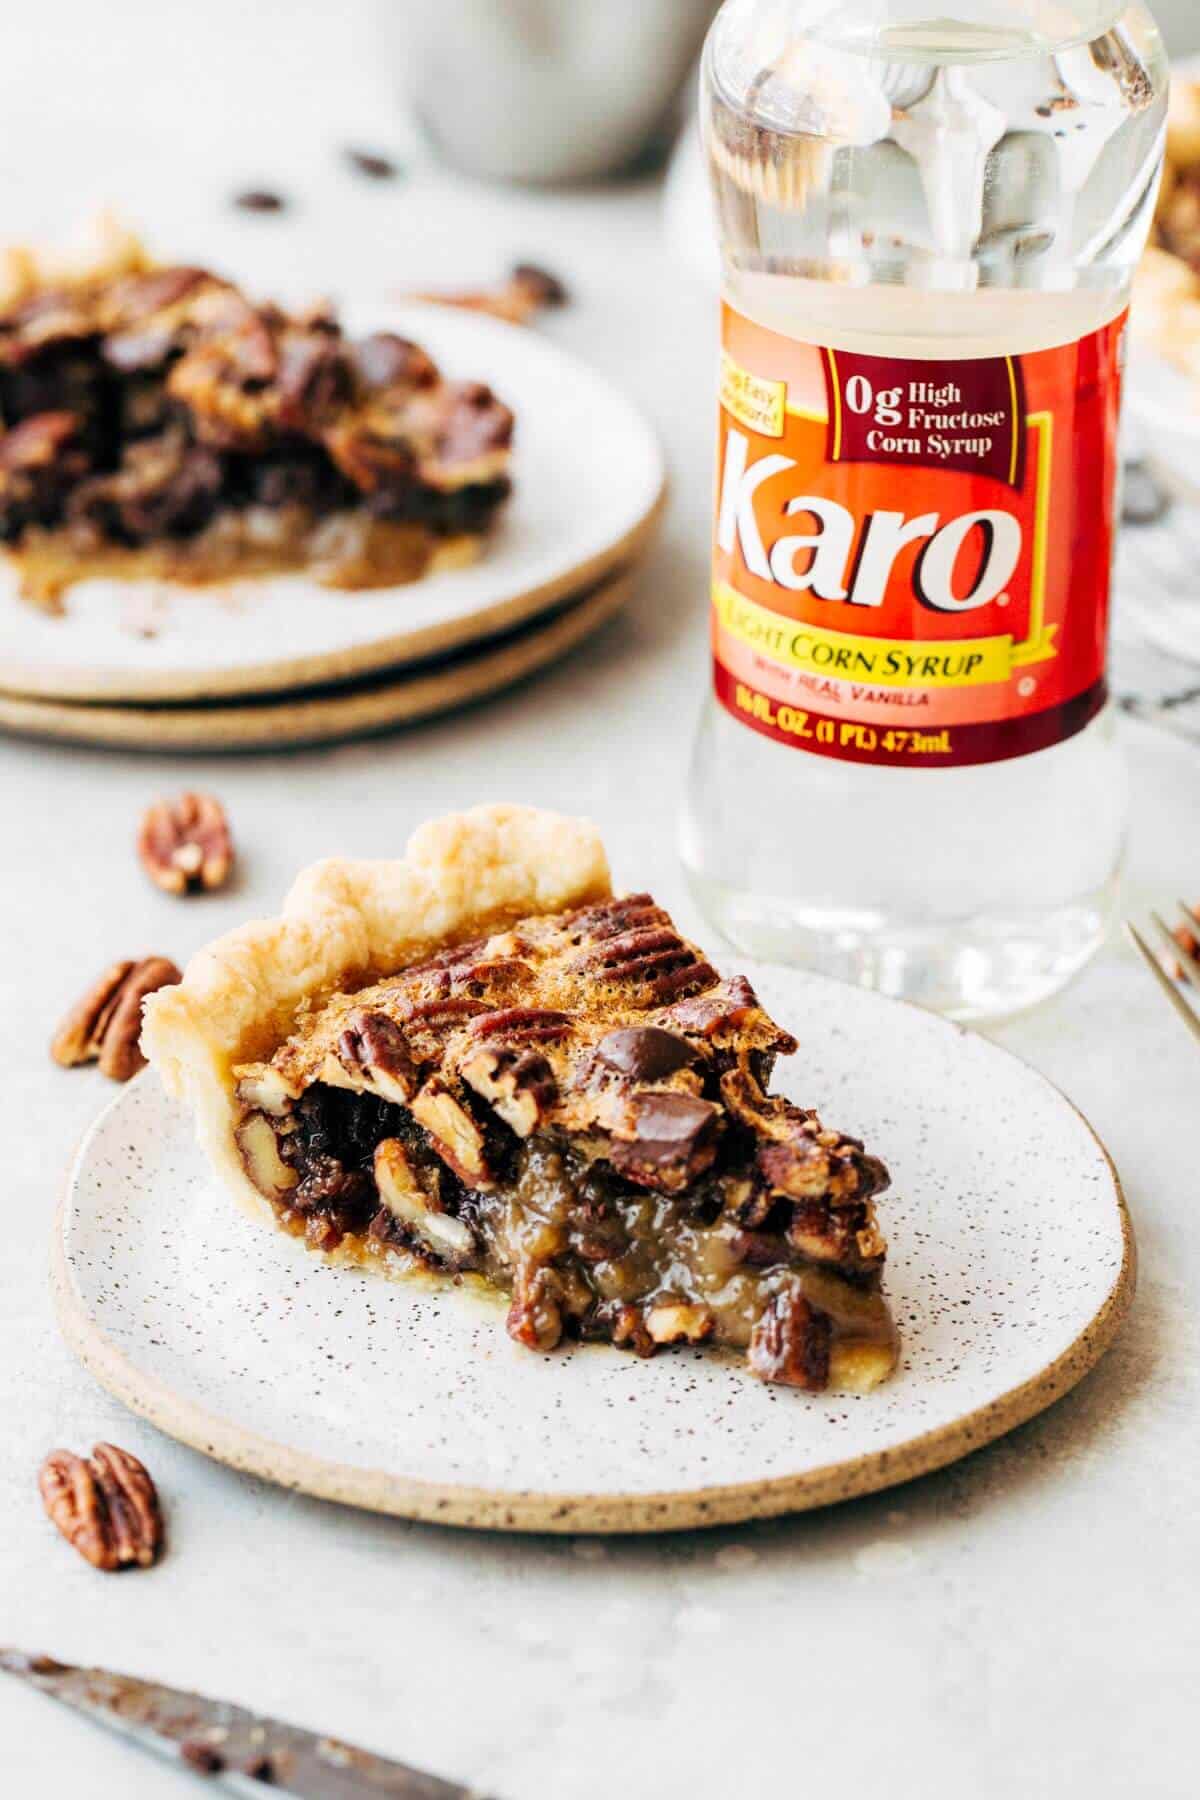 A slice of chocolate pecan pie on a white plate with a bottle of corn syrup in the background.